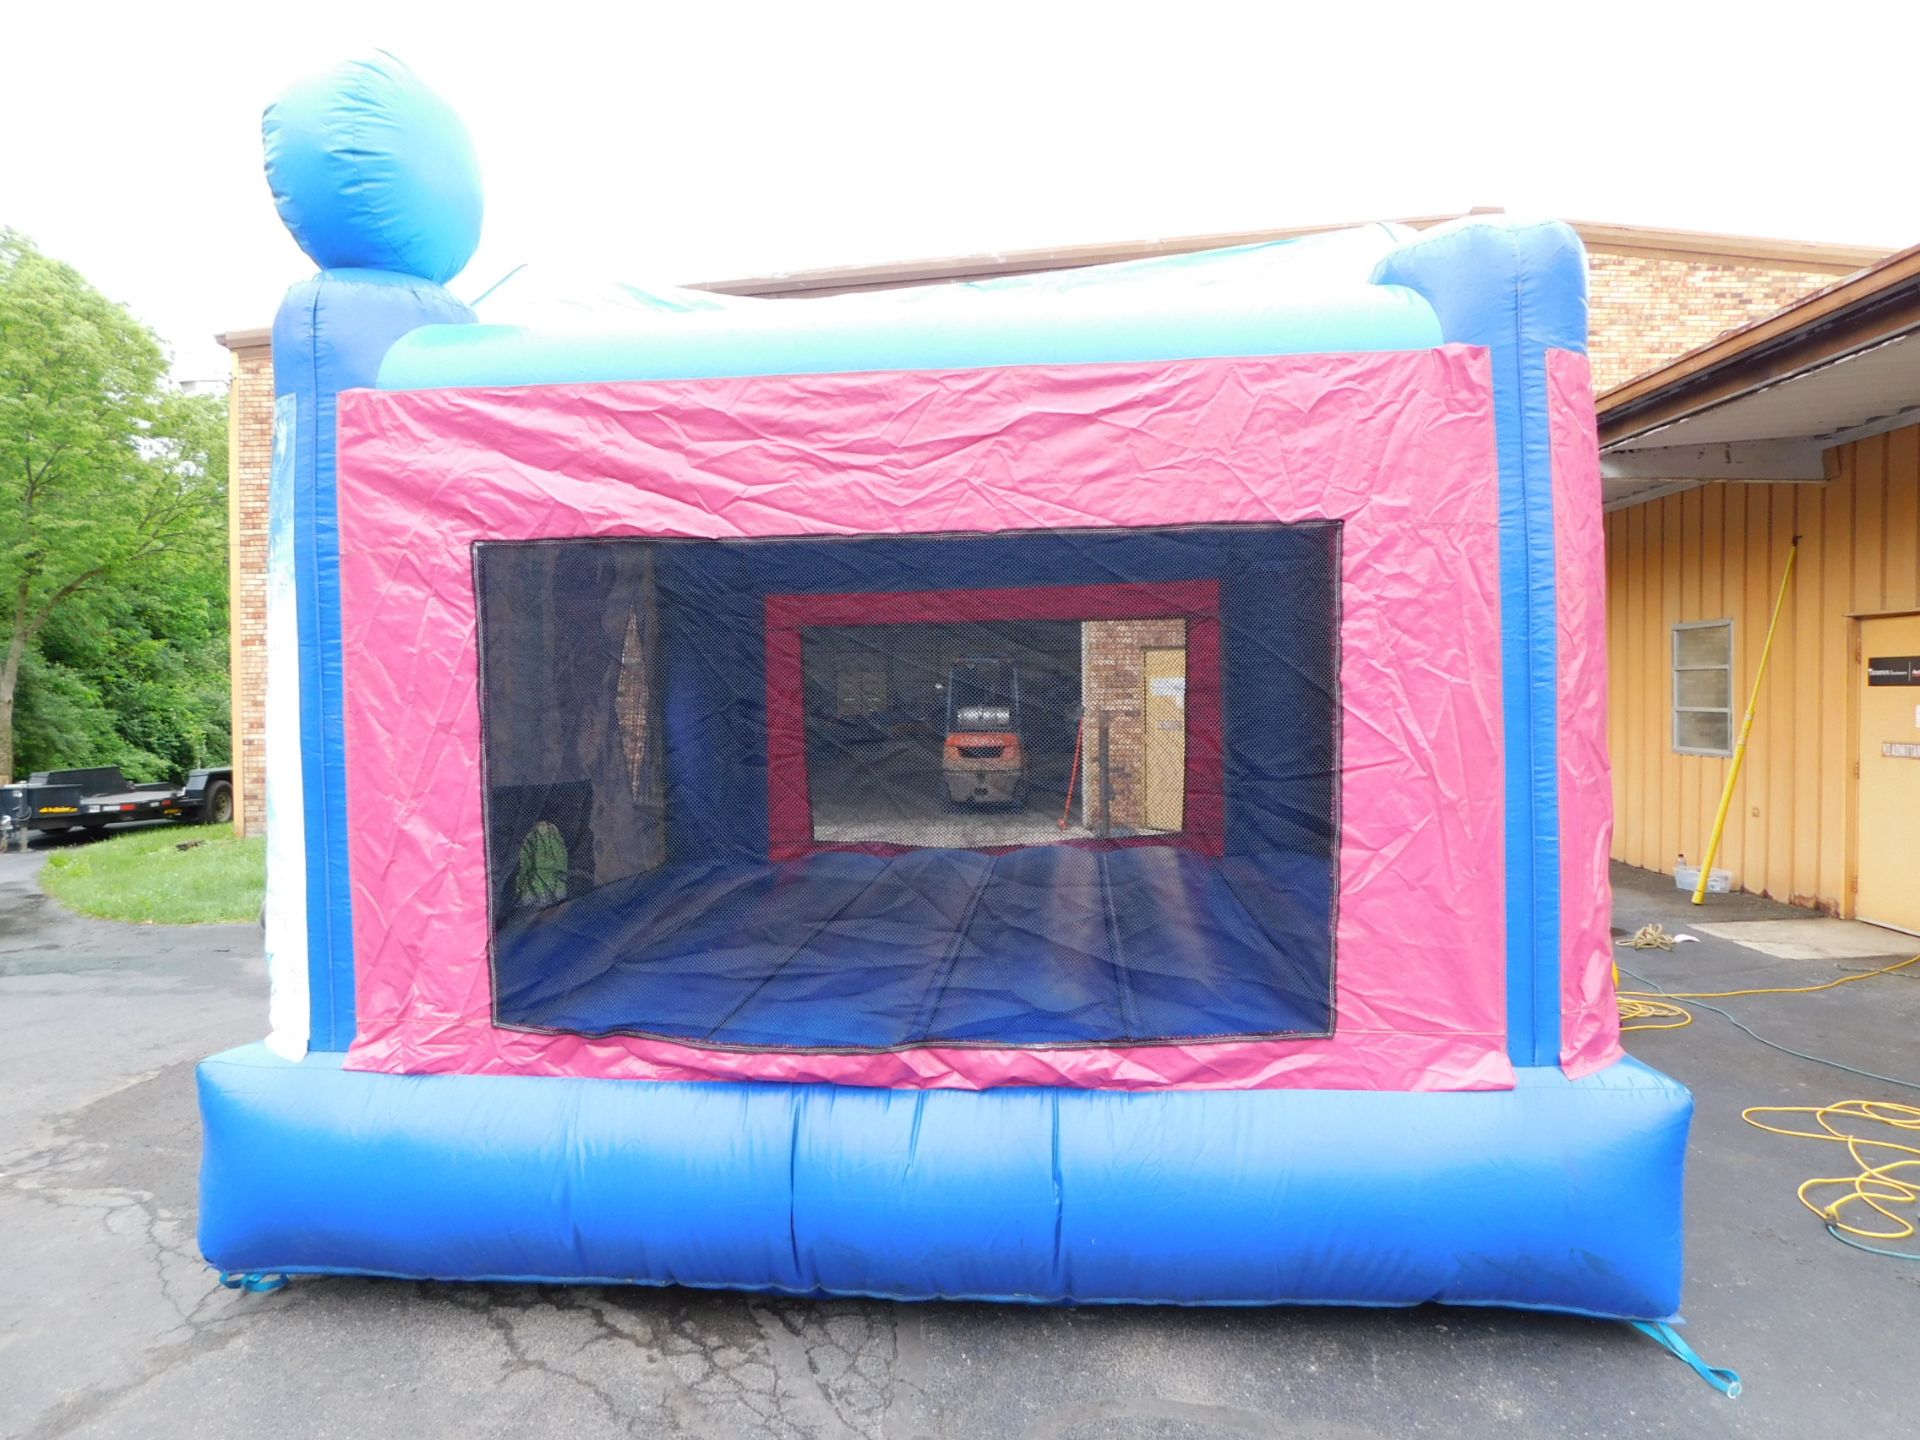 Ninja Jump Frozen Bounce House Inflatable, 14'WX15'LX12'H - Image 5 of 14